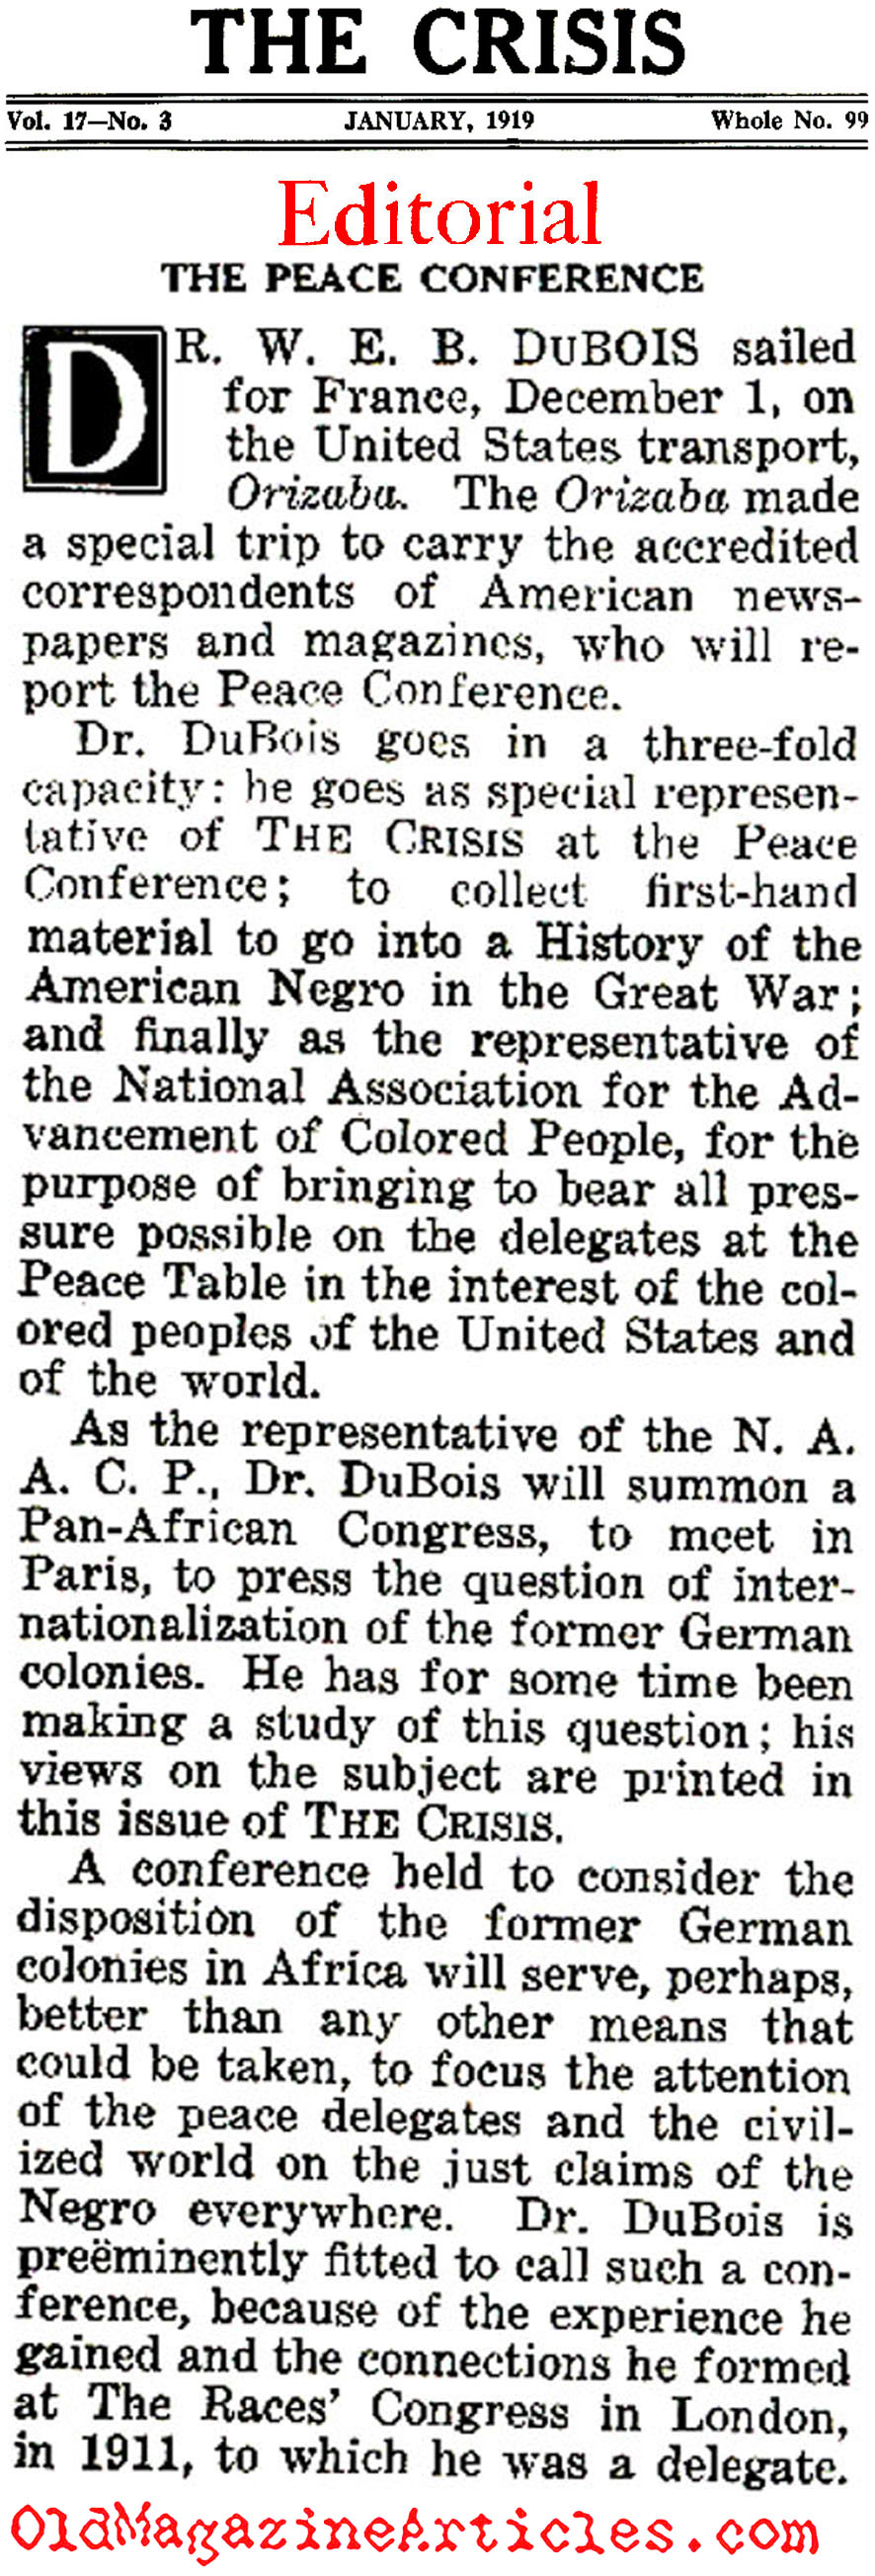 Dr. W.E.B. Dubois Will Attend The Peace Conference (The Crises, 1919)